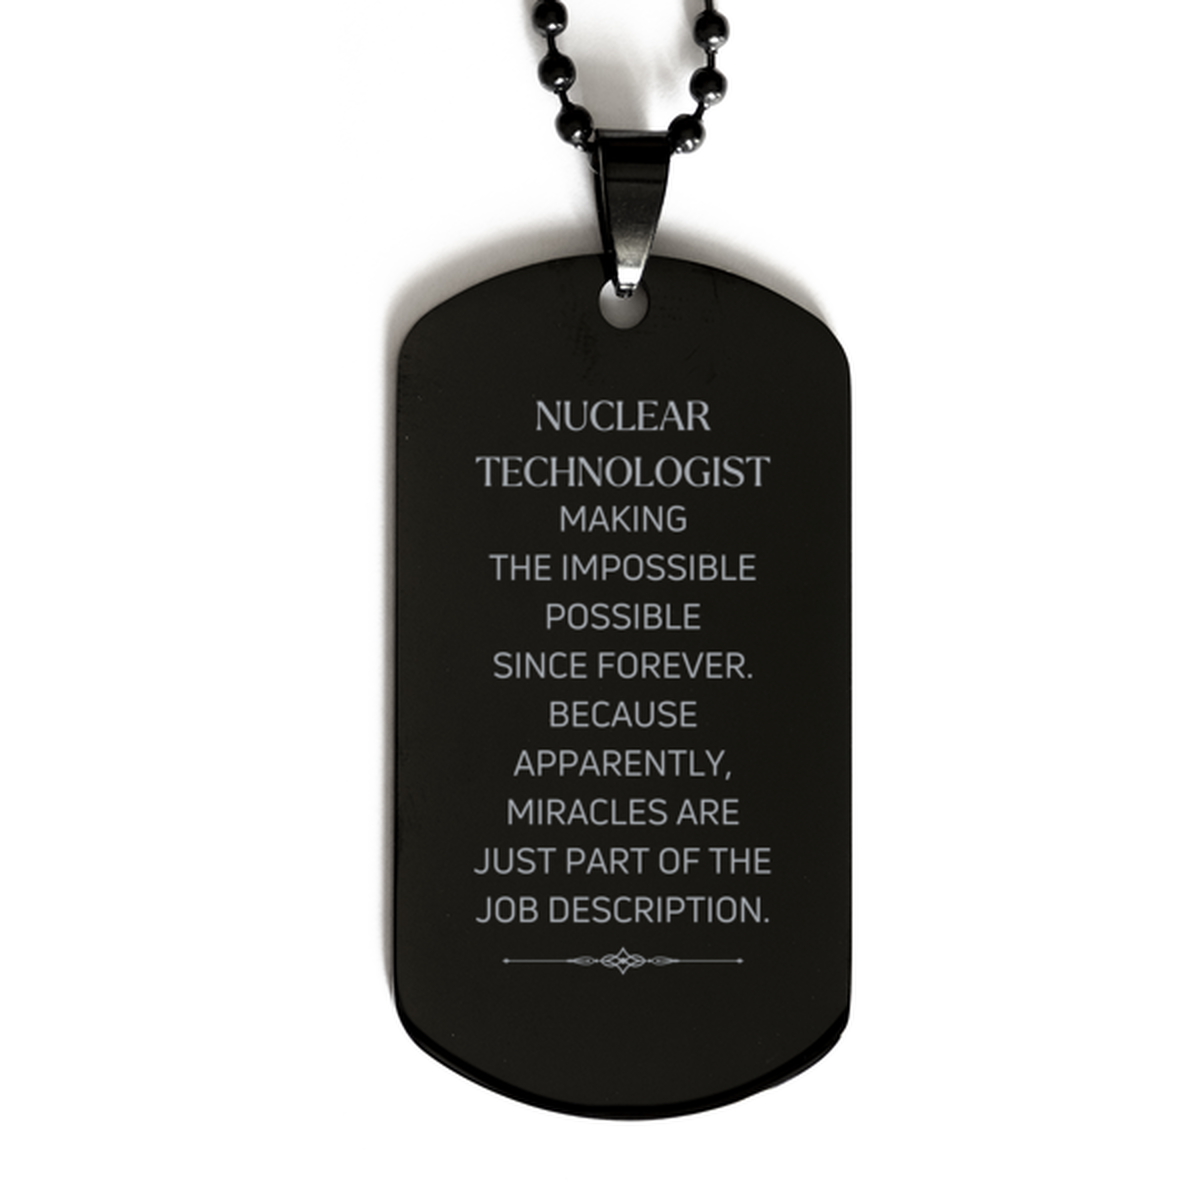 Funny Nuclear Technologist Gifts, Miracles are just part of the job description, Inspirational Birthday Black Dog Tag For Nuclear Technologist, Men, Women, Coworkers, Friends, Boss